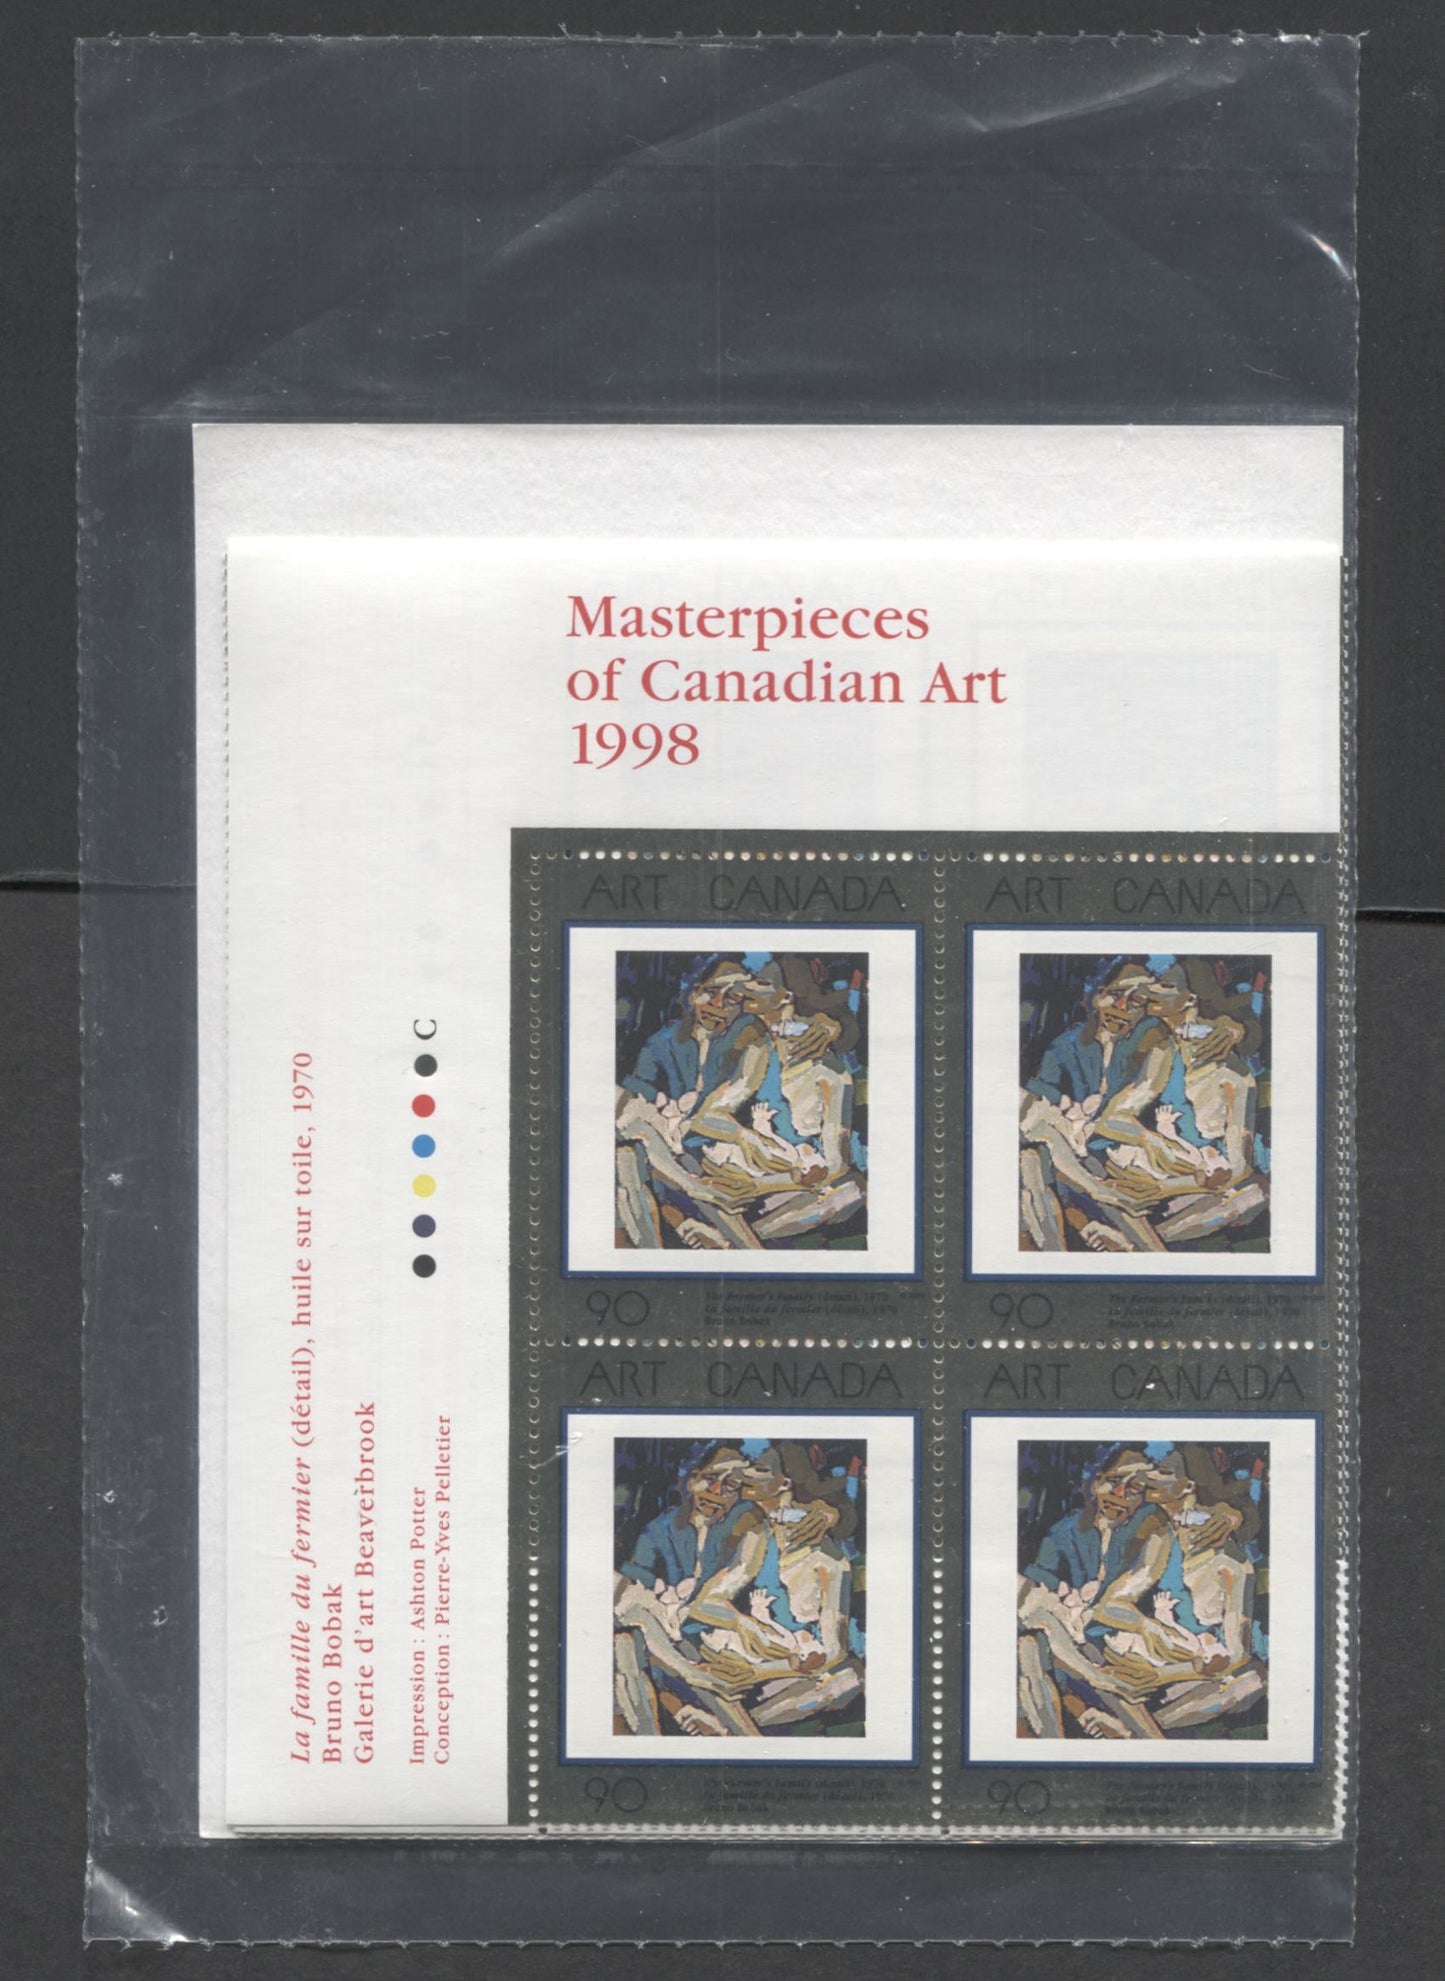 Lot 332 Canada #1754 90c Multicolored (Silver) The Farmer's Family 1998 Masterpieces of Canadian Art, Canada Post Sealed Pack of Inscription Blocks on TRC Paper With HB Type 7A Insert Card, VFNH, Unitrade Cat. $36